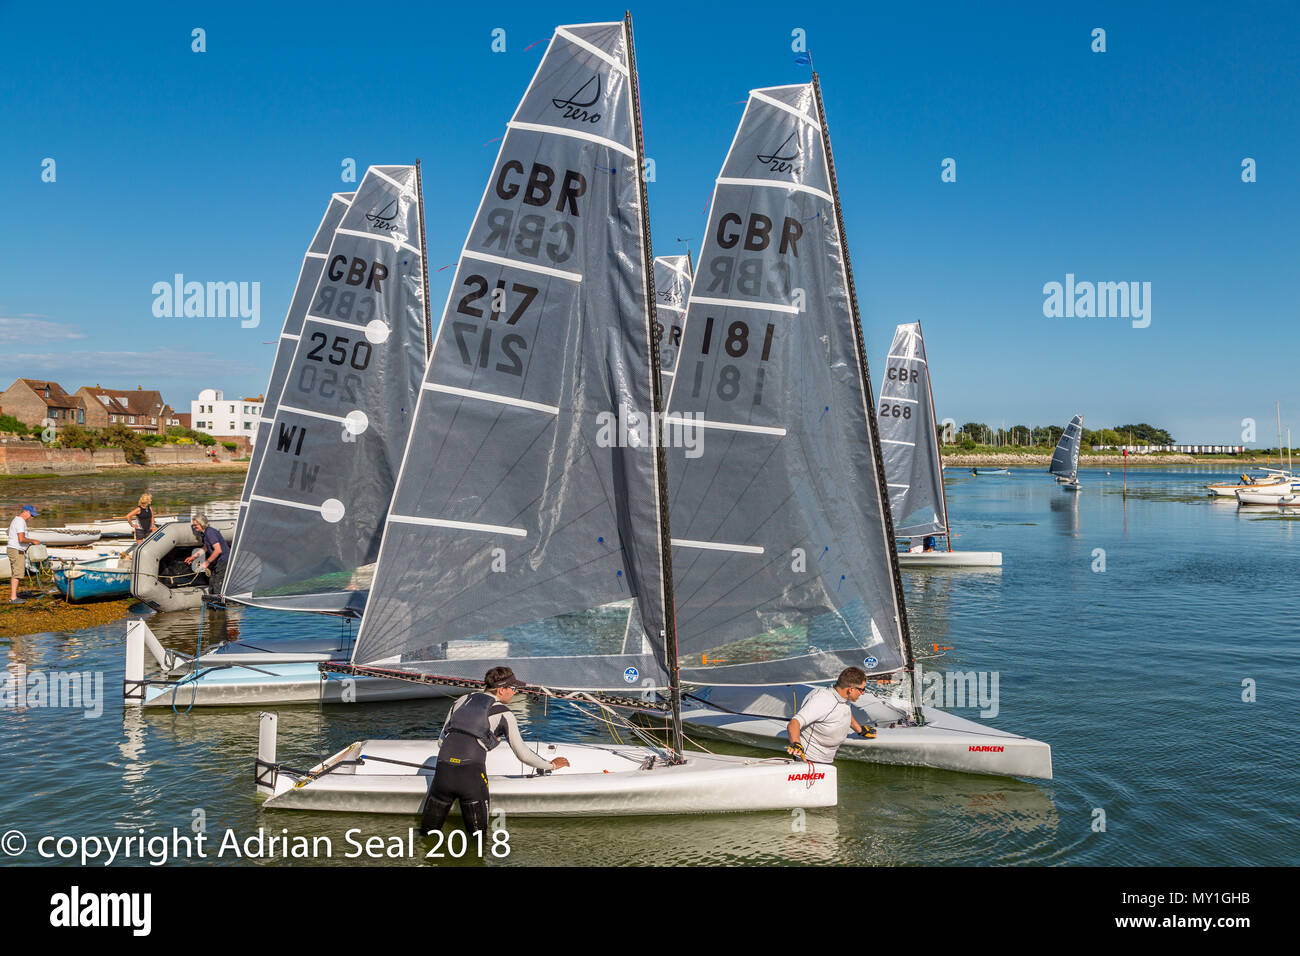 Single seater racing yachts in the basin at Emsworth a small and picturesque town toward the northern end of Chichester harbour, Hampshire, England UK Stock Photo